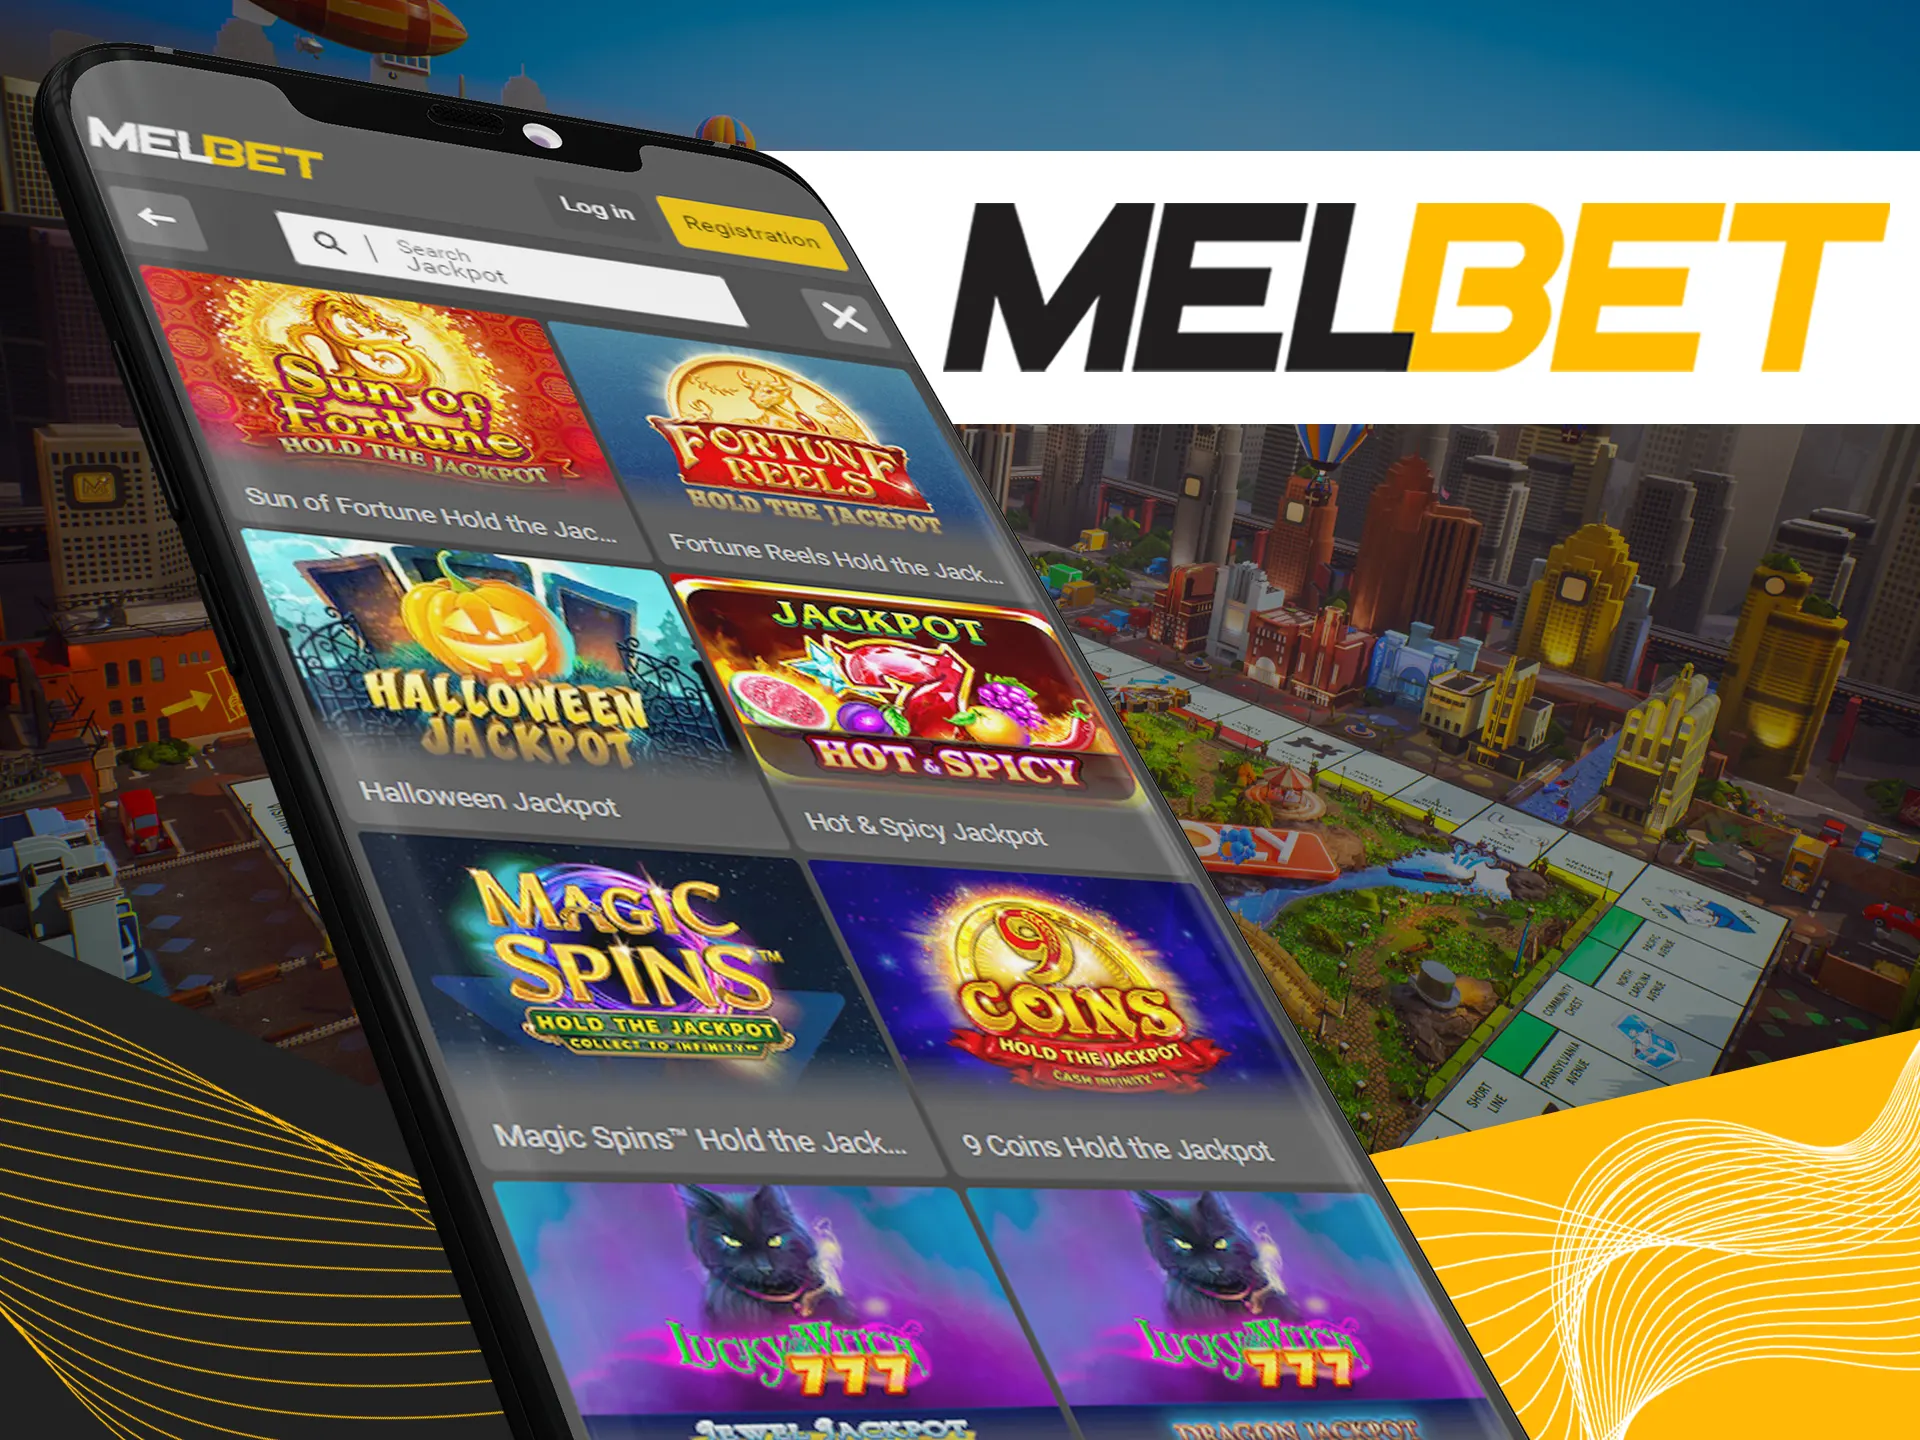 Win huge amount of money by playing jackpot games at Melbet.